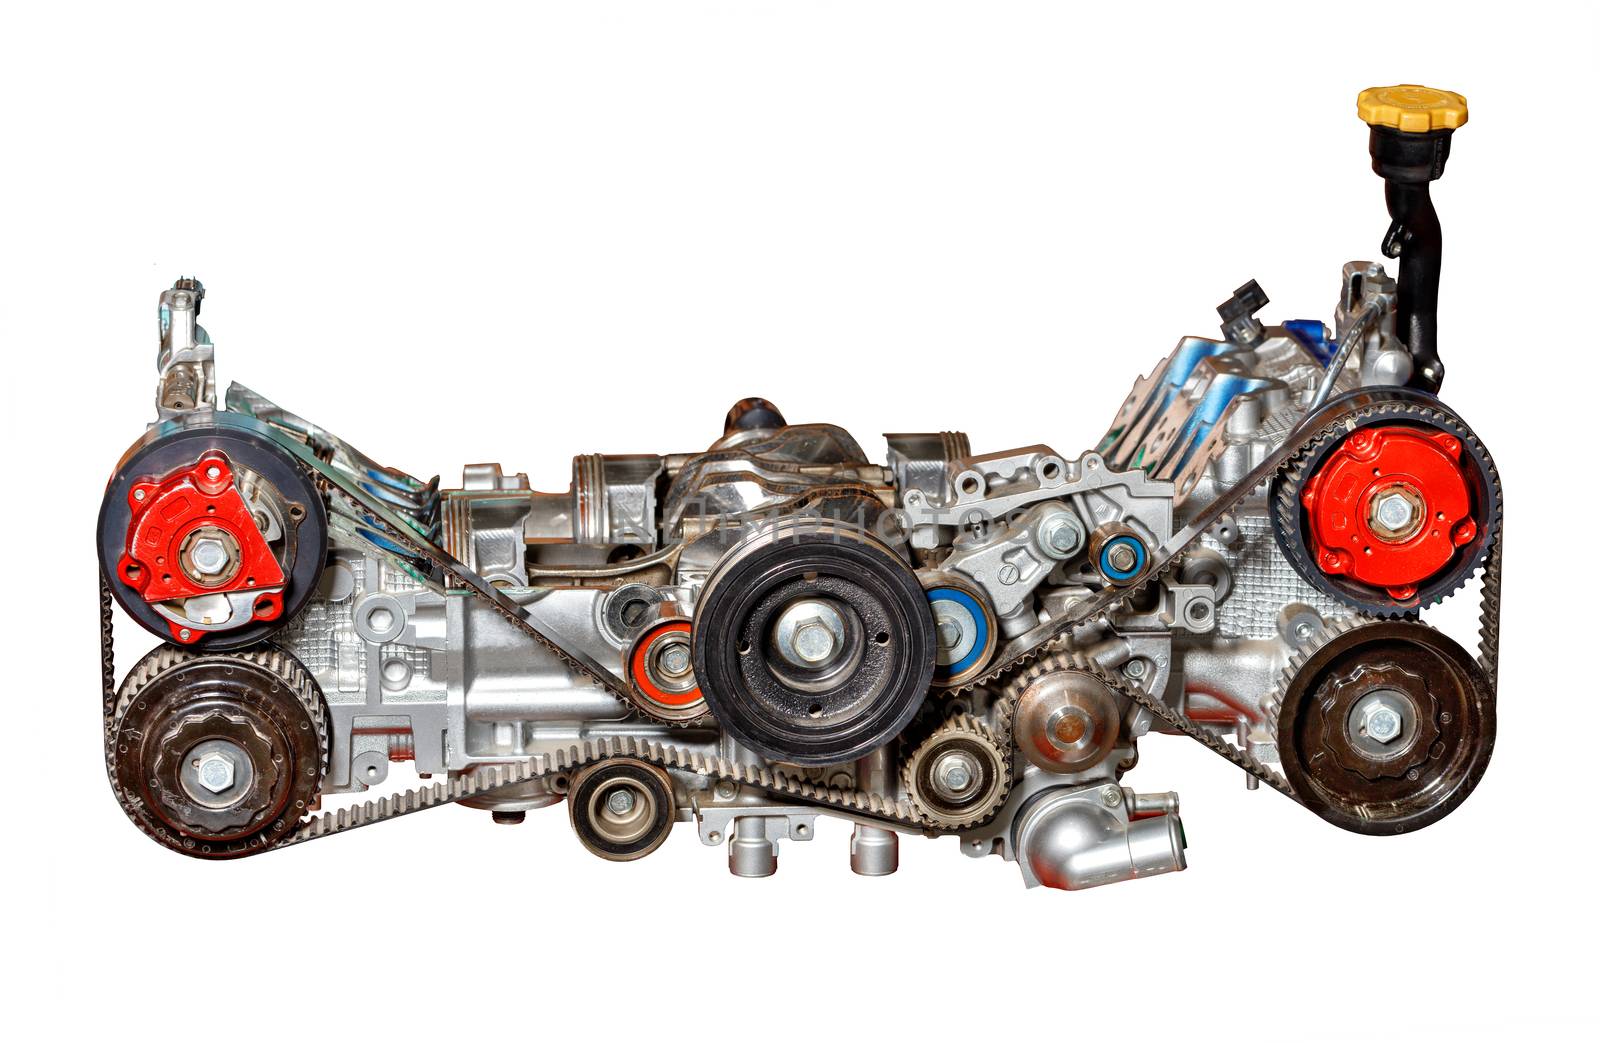 The stand shows the worn-out internal combustion engine of a modern automobile, image isolated on white background. Internal combustion engine. Car motor. Auto parts.